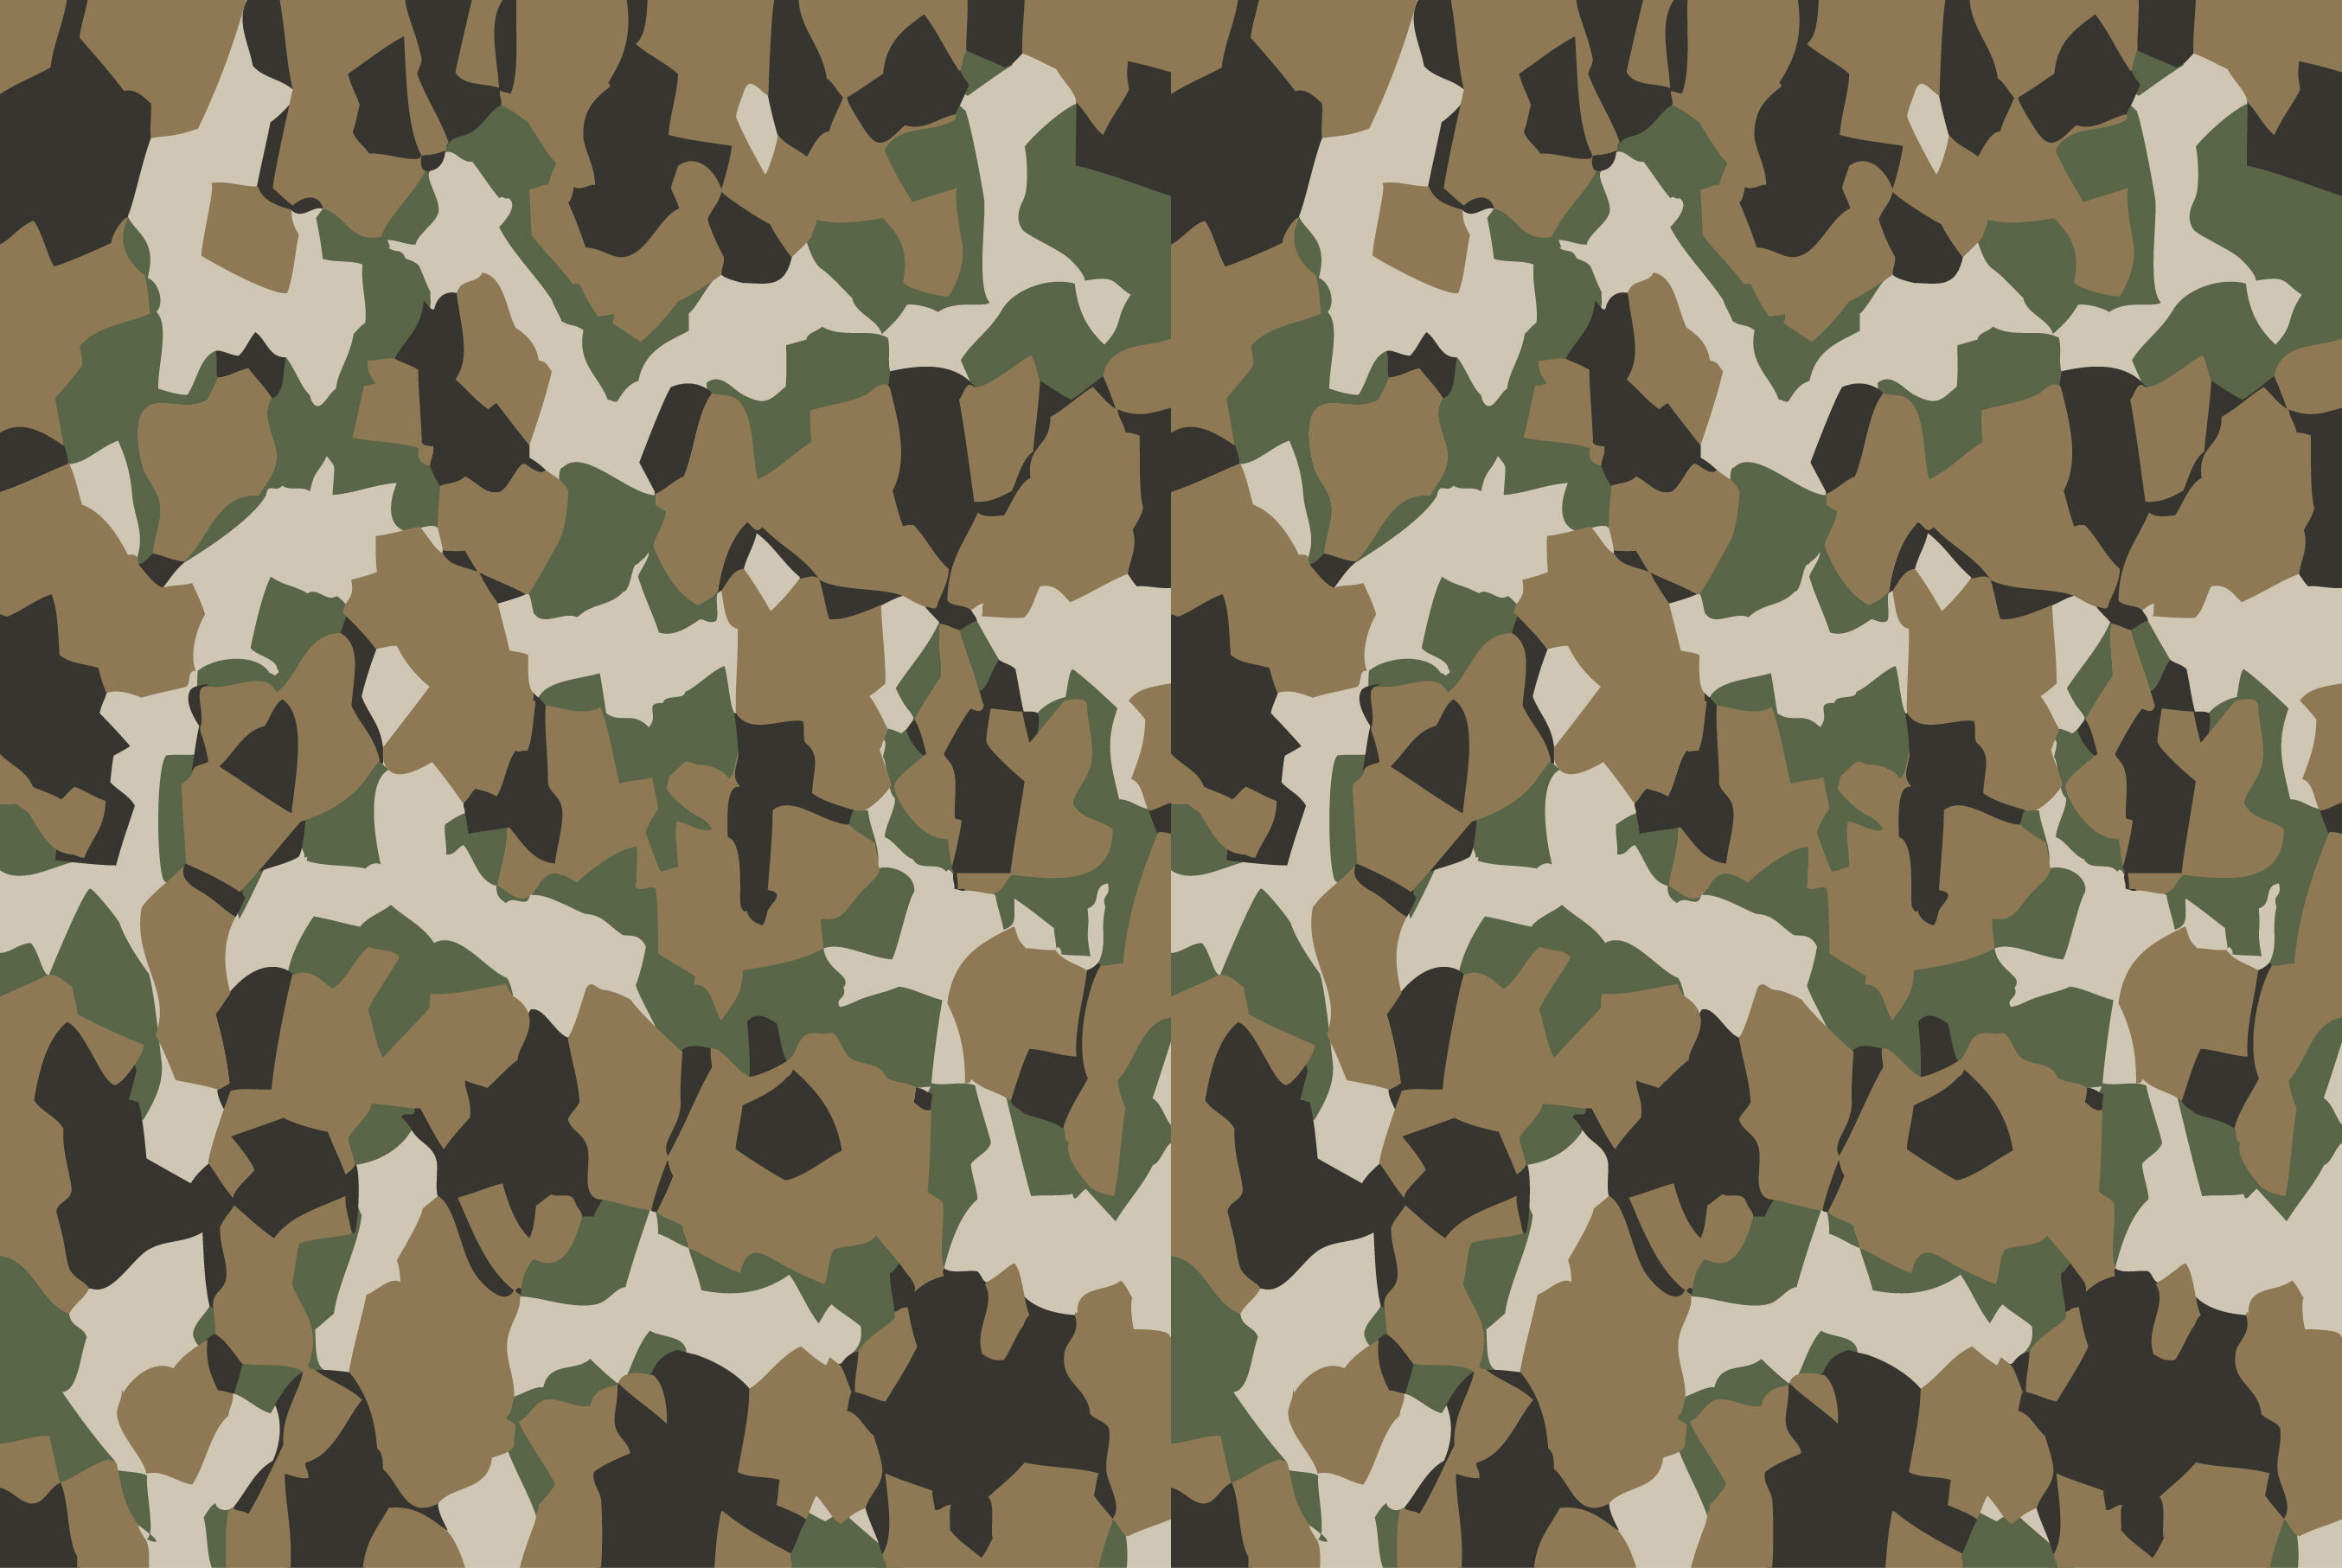 Camouflage pattern background vector. Military style masking camo